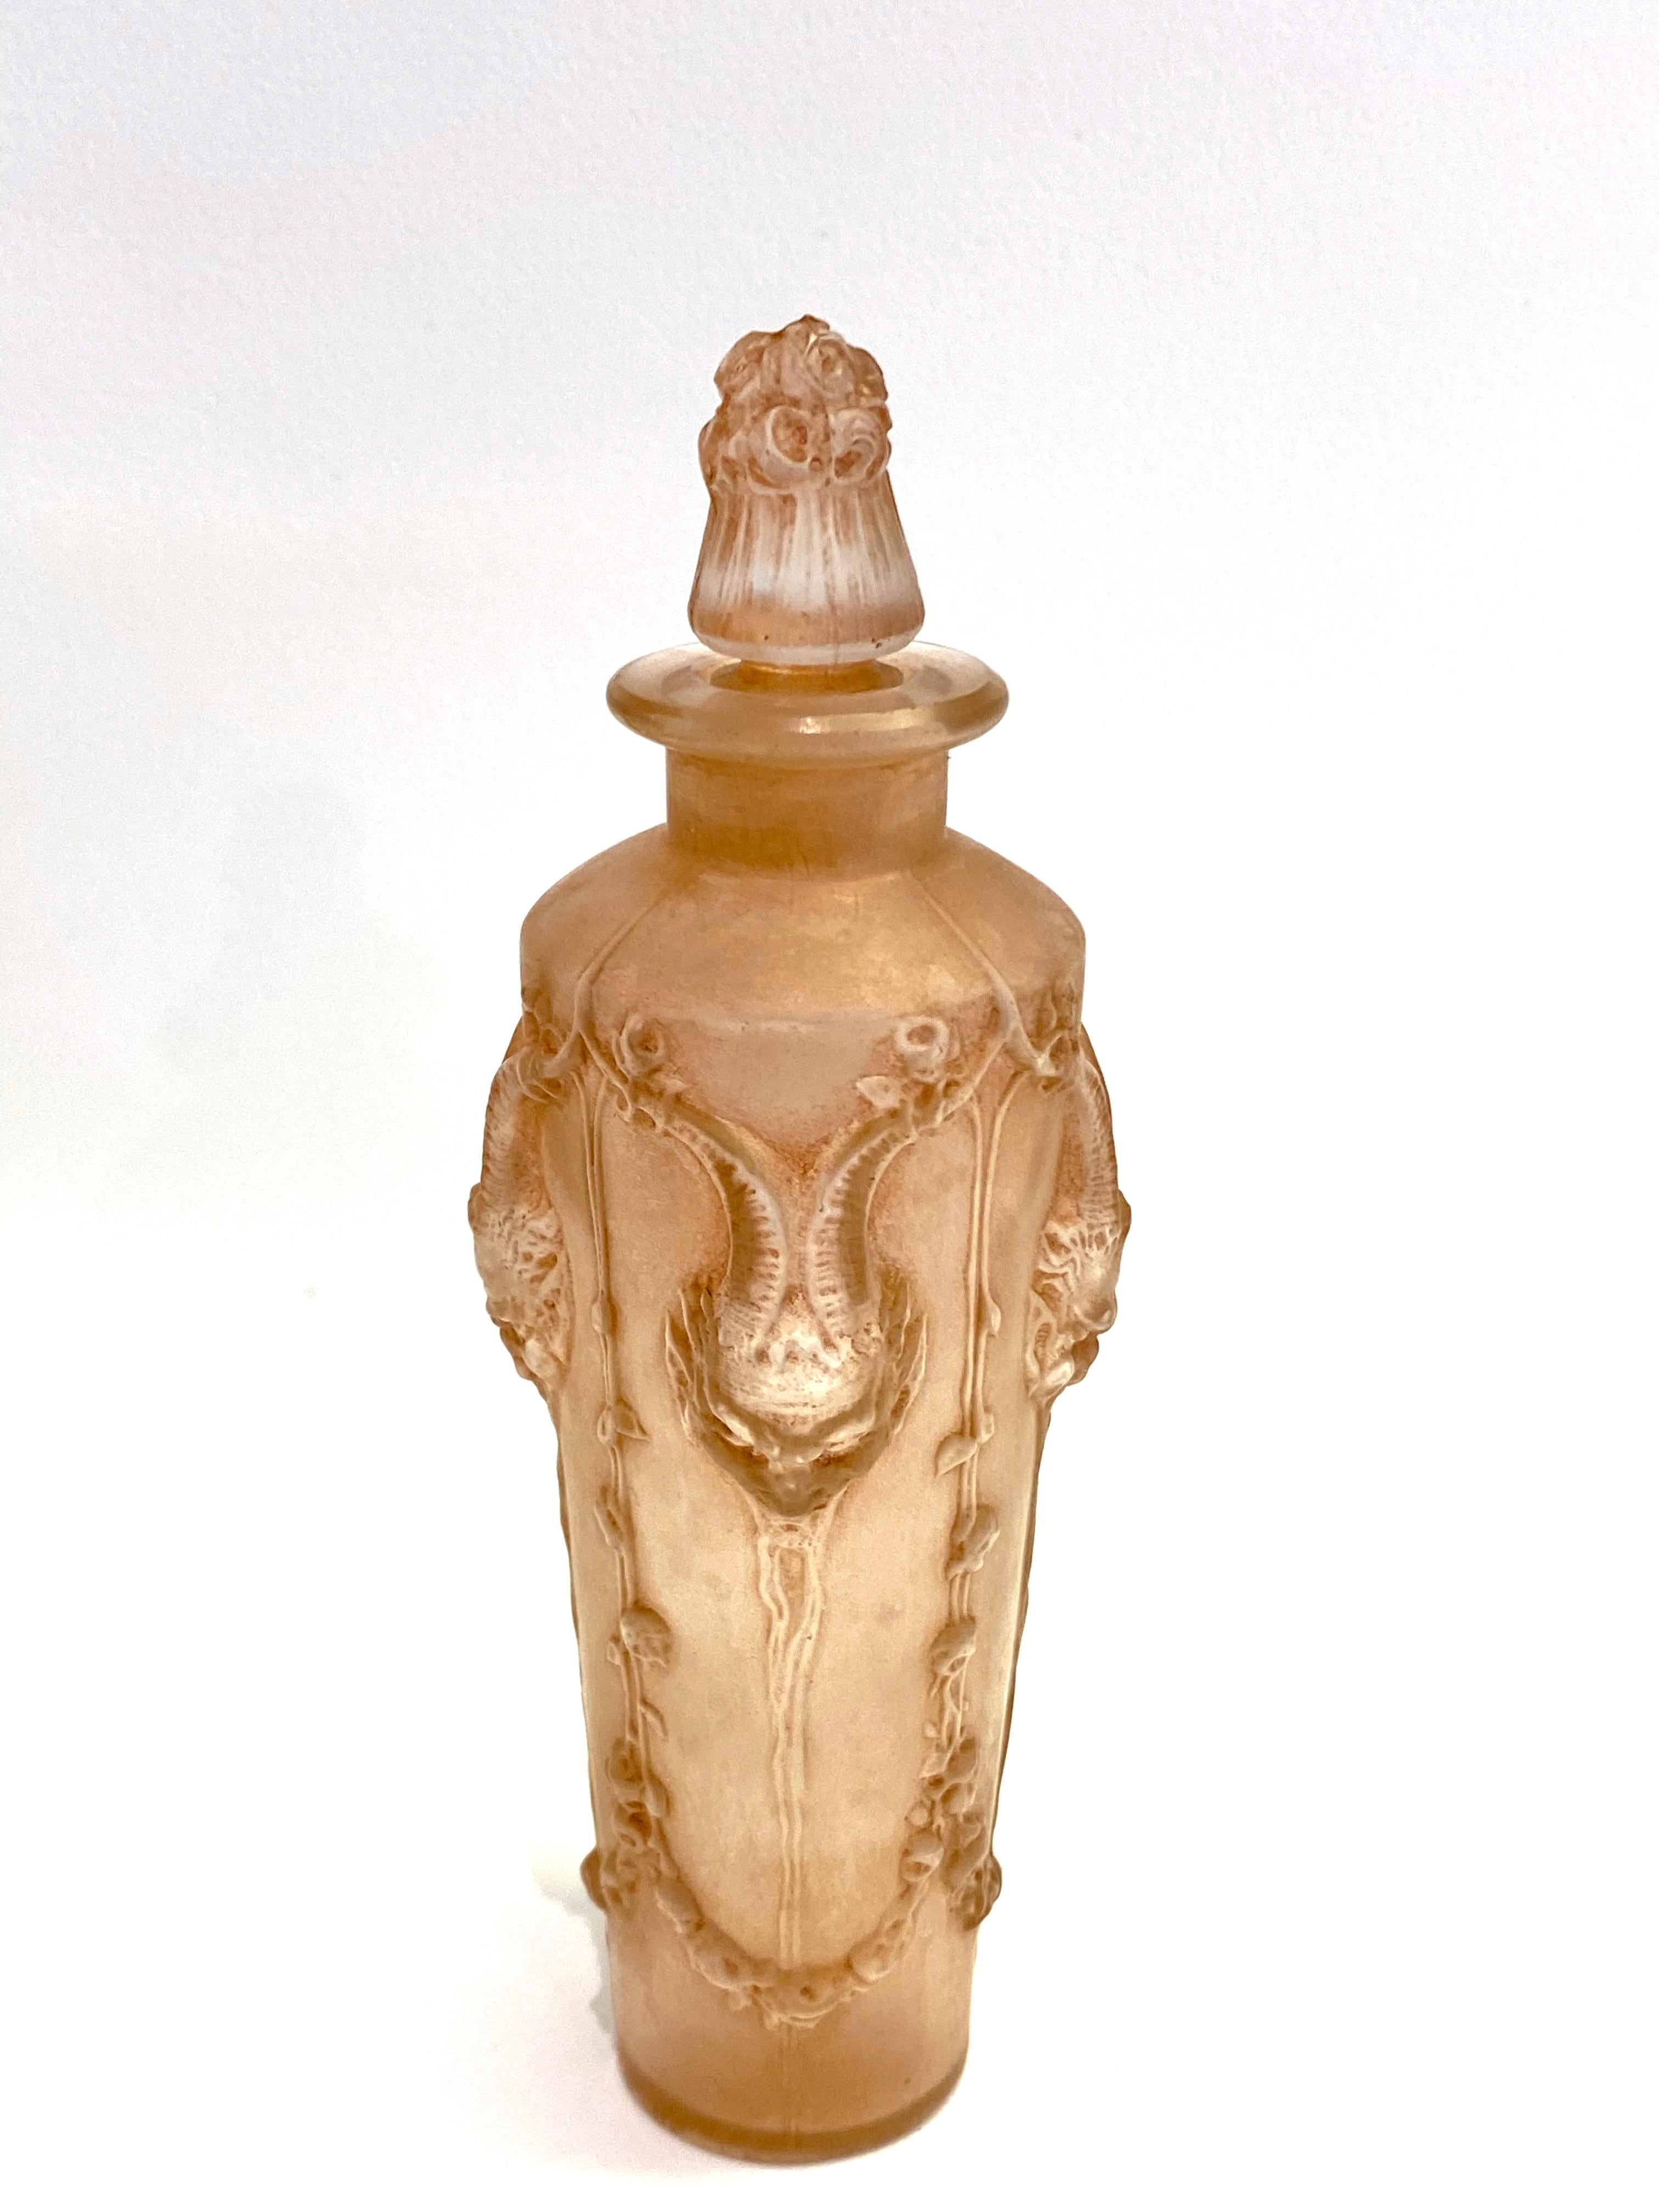 Molded 1920 René Lalique Pan Perfume Bottle Frosted Glass with Sepia Patina, Satyres